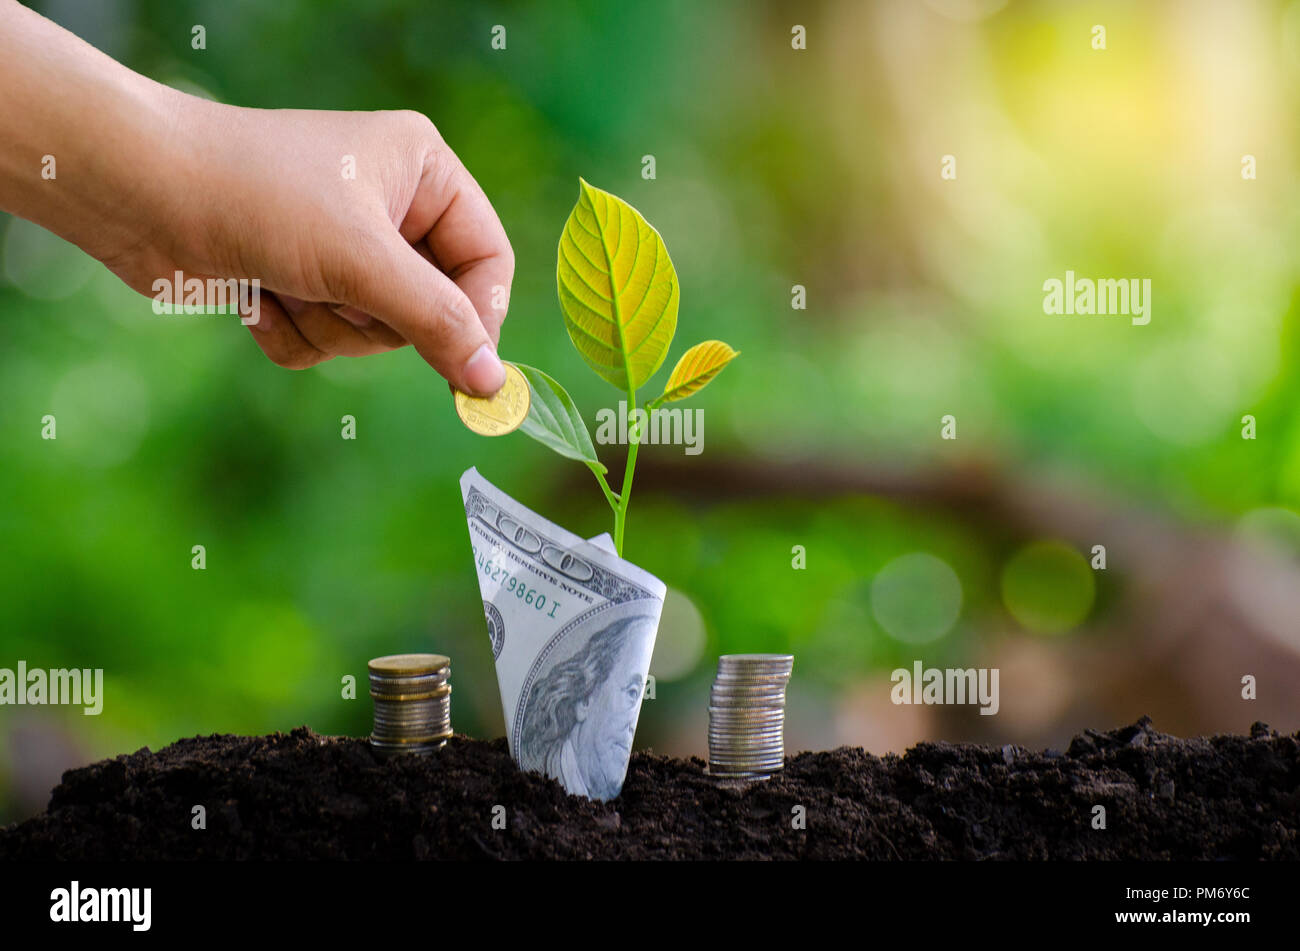 hand Put money Bottle Banknotes tree Image of bank note with plant growing on top for business green natural background money saving and investment fi Stock Photo